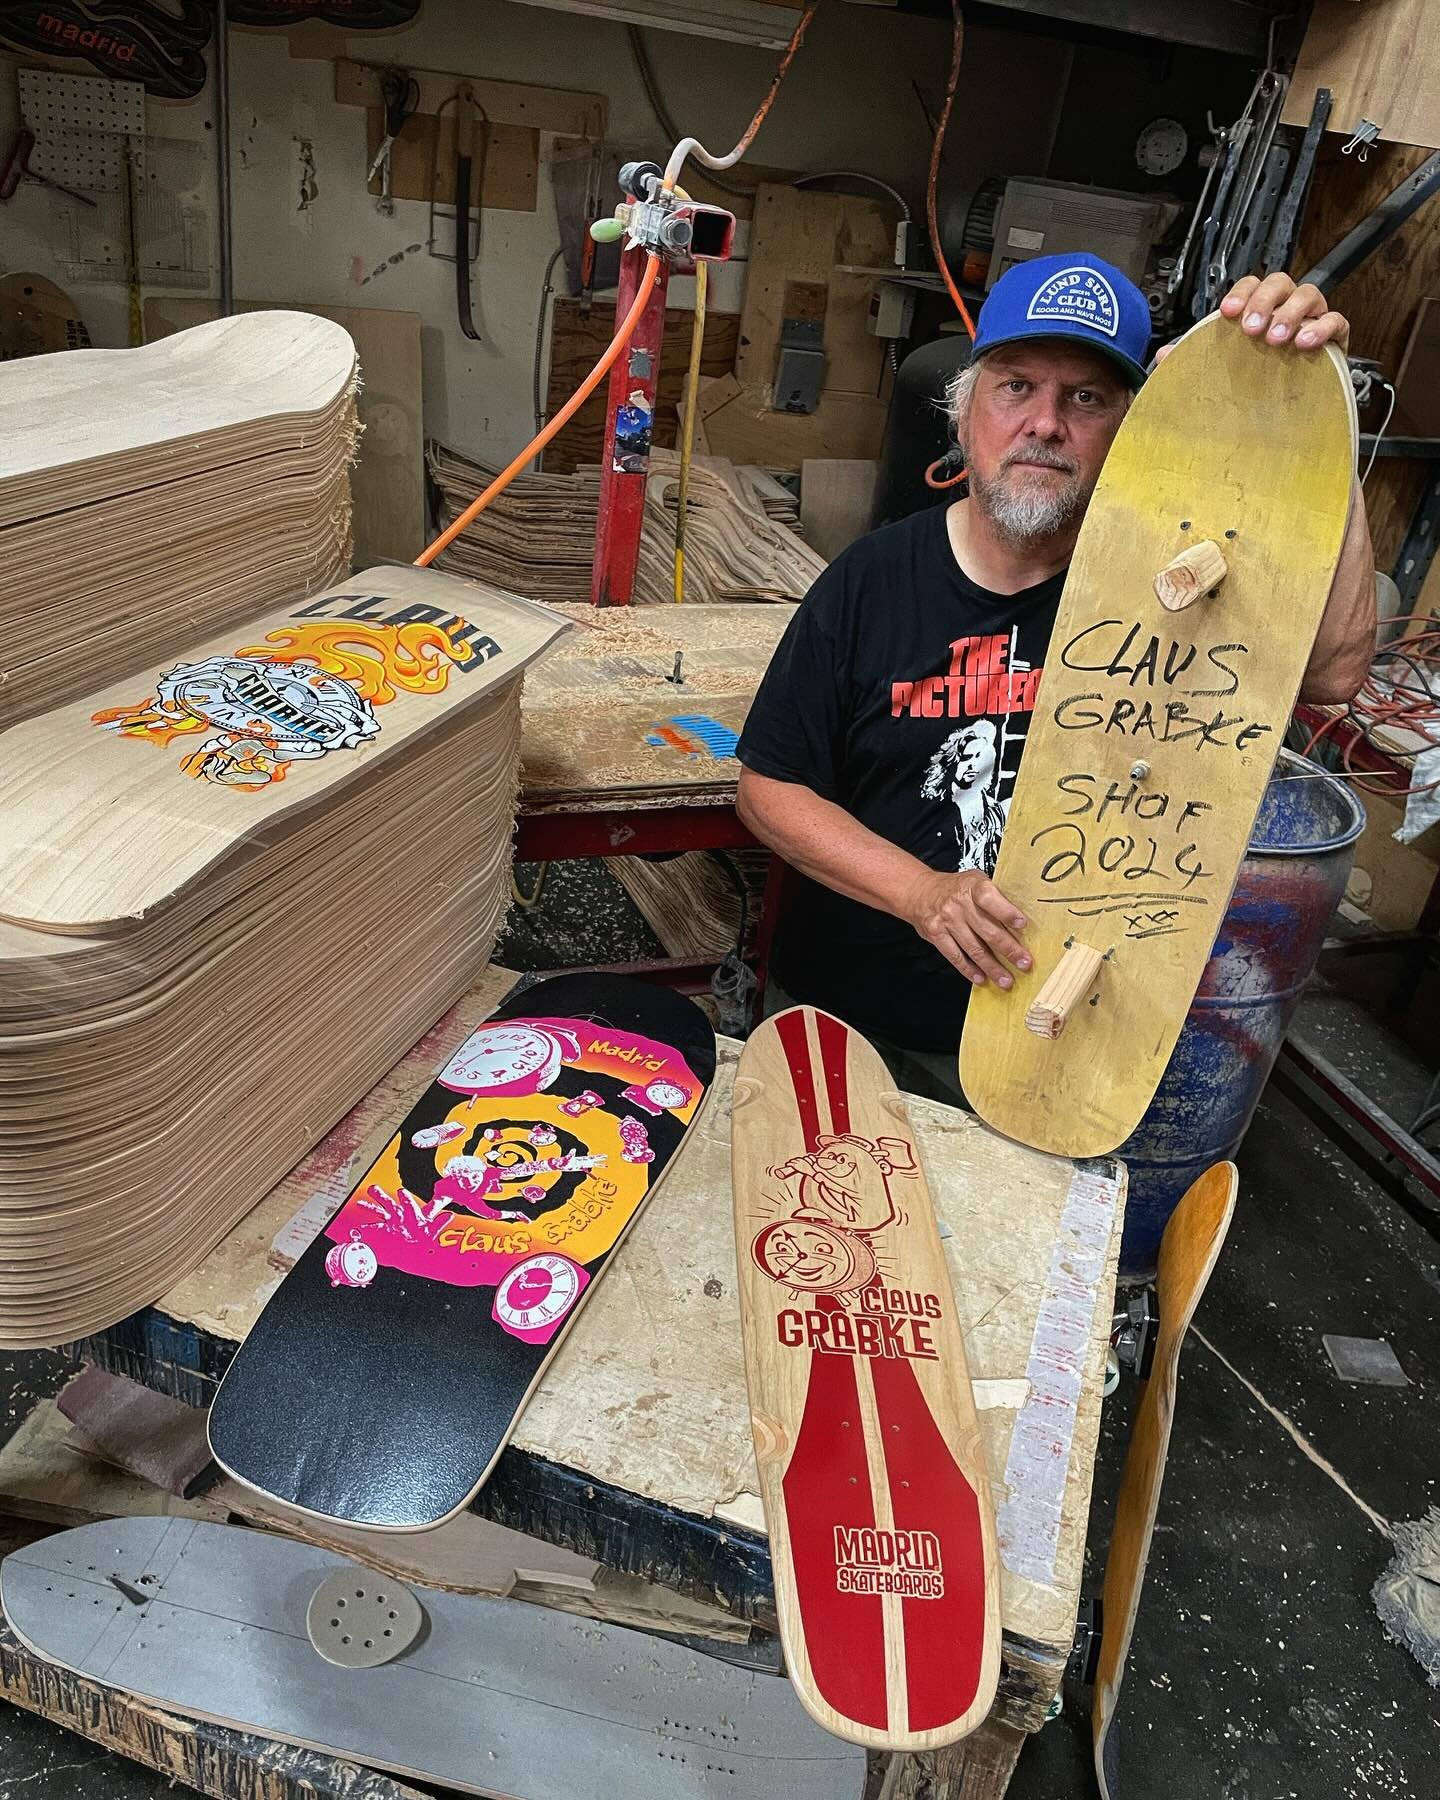 Claus... is in the House💥

Recent @skateboardinghalloffame inductee and long time Madrid Family @clausgrabke spent the day in the shop, finally putting himself to good use 😜

He's working on something special, set to unveil soon! In the meantime, y